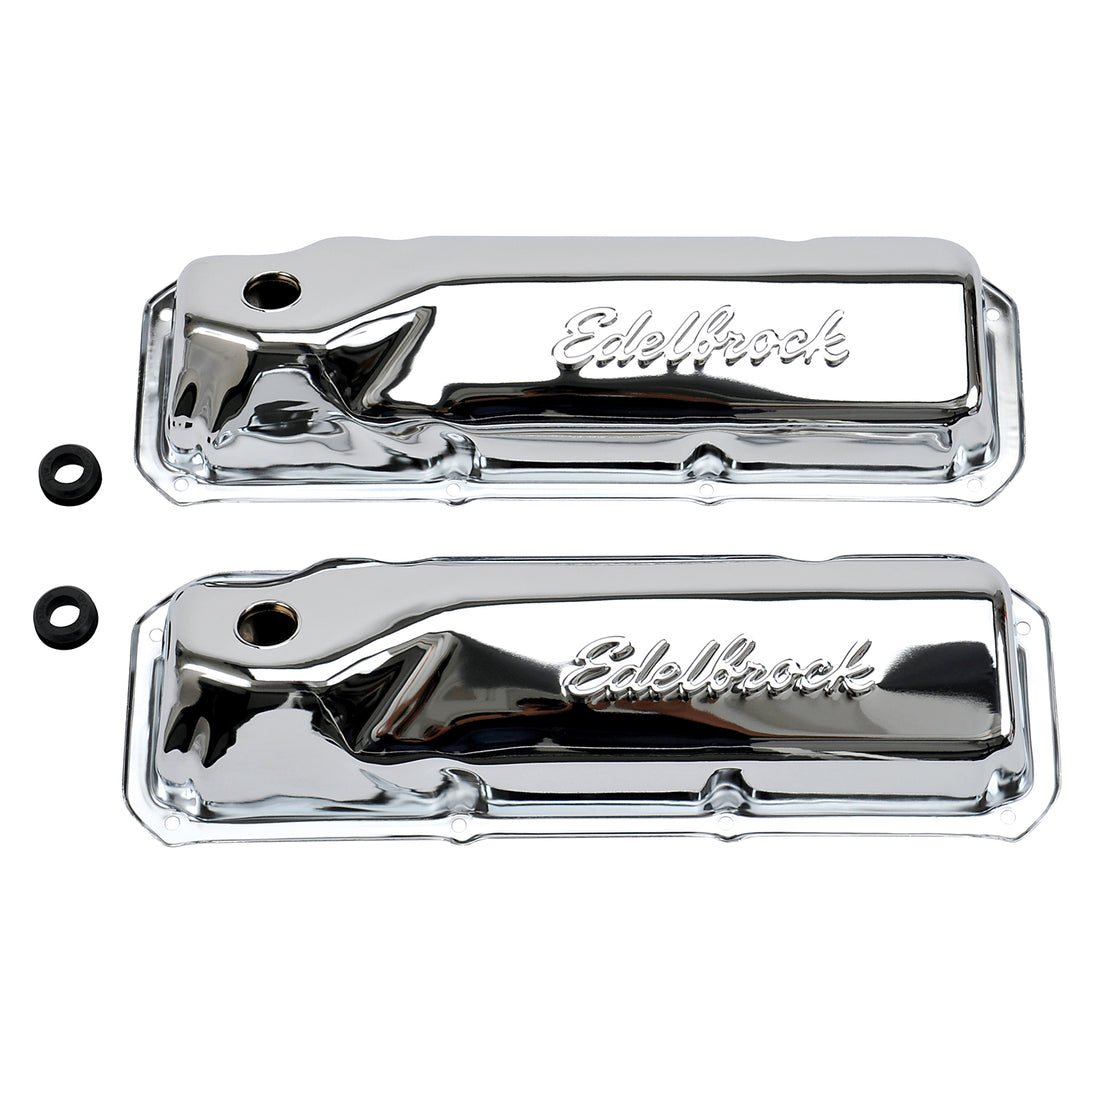 Signature Series Valve Covers for Ford 351M-400 and 351C V8 Edelbrock